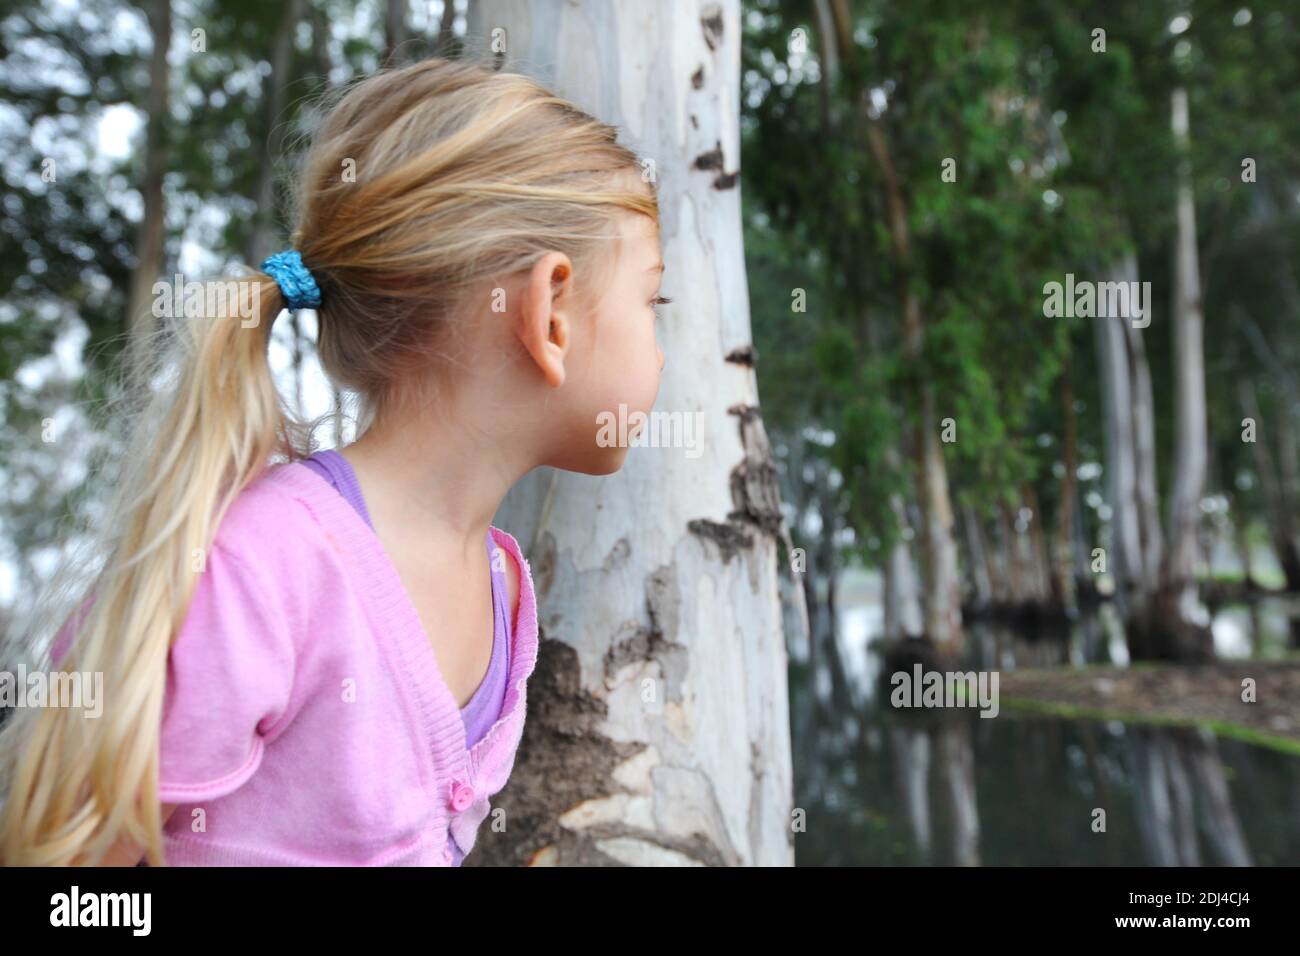 Young girl plays hide and seek behind a eucalyptus tree Stock Photo